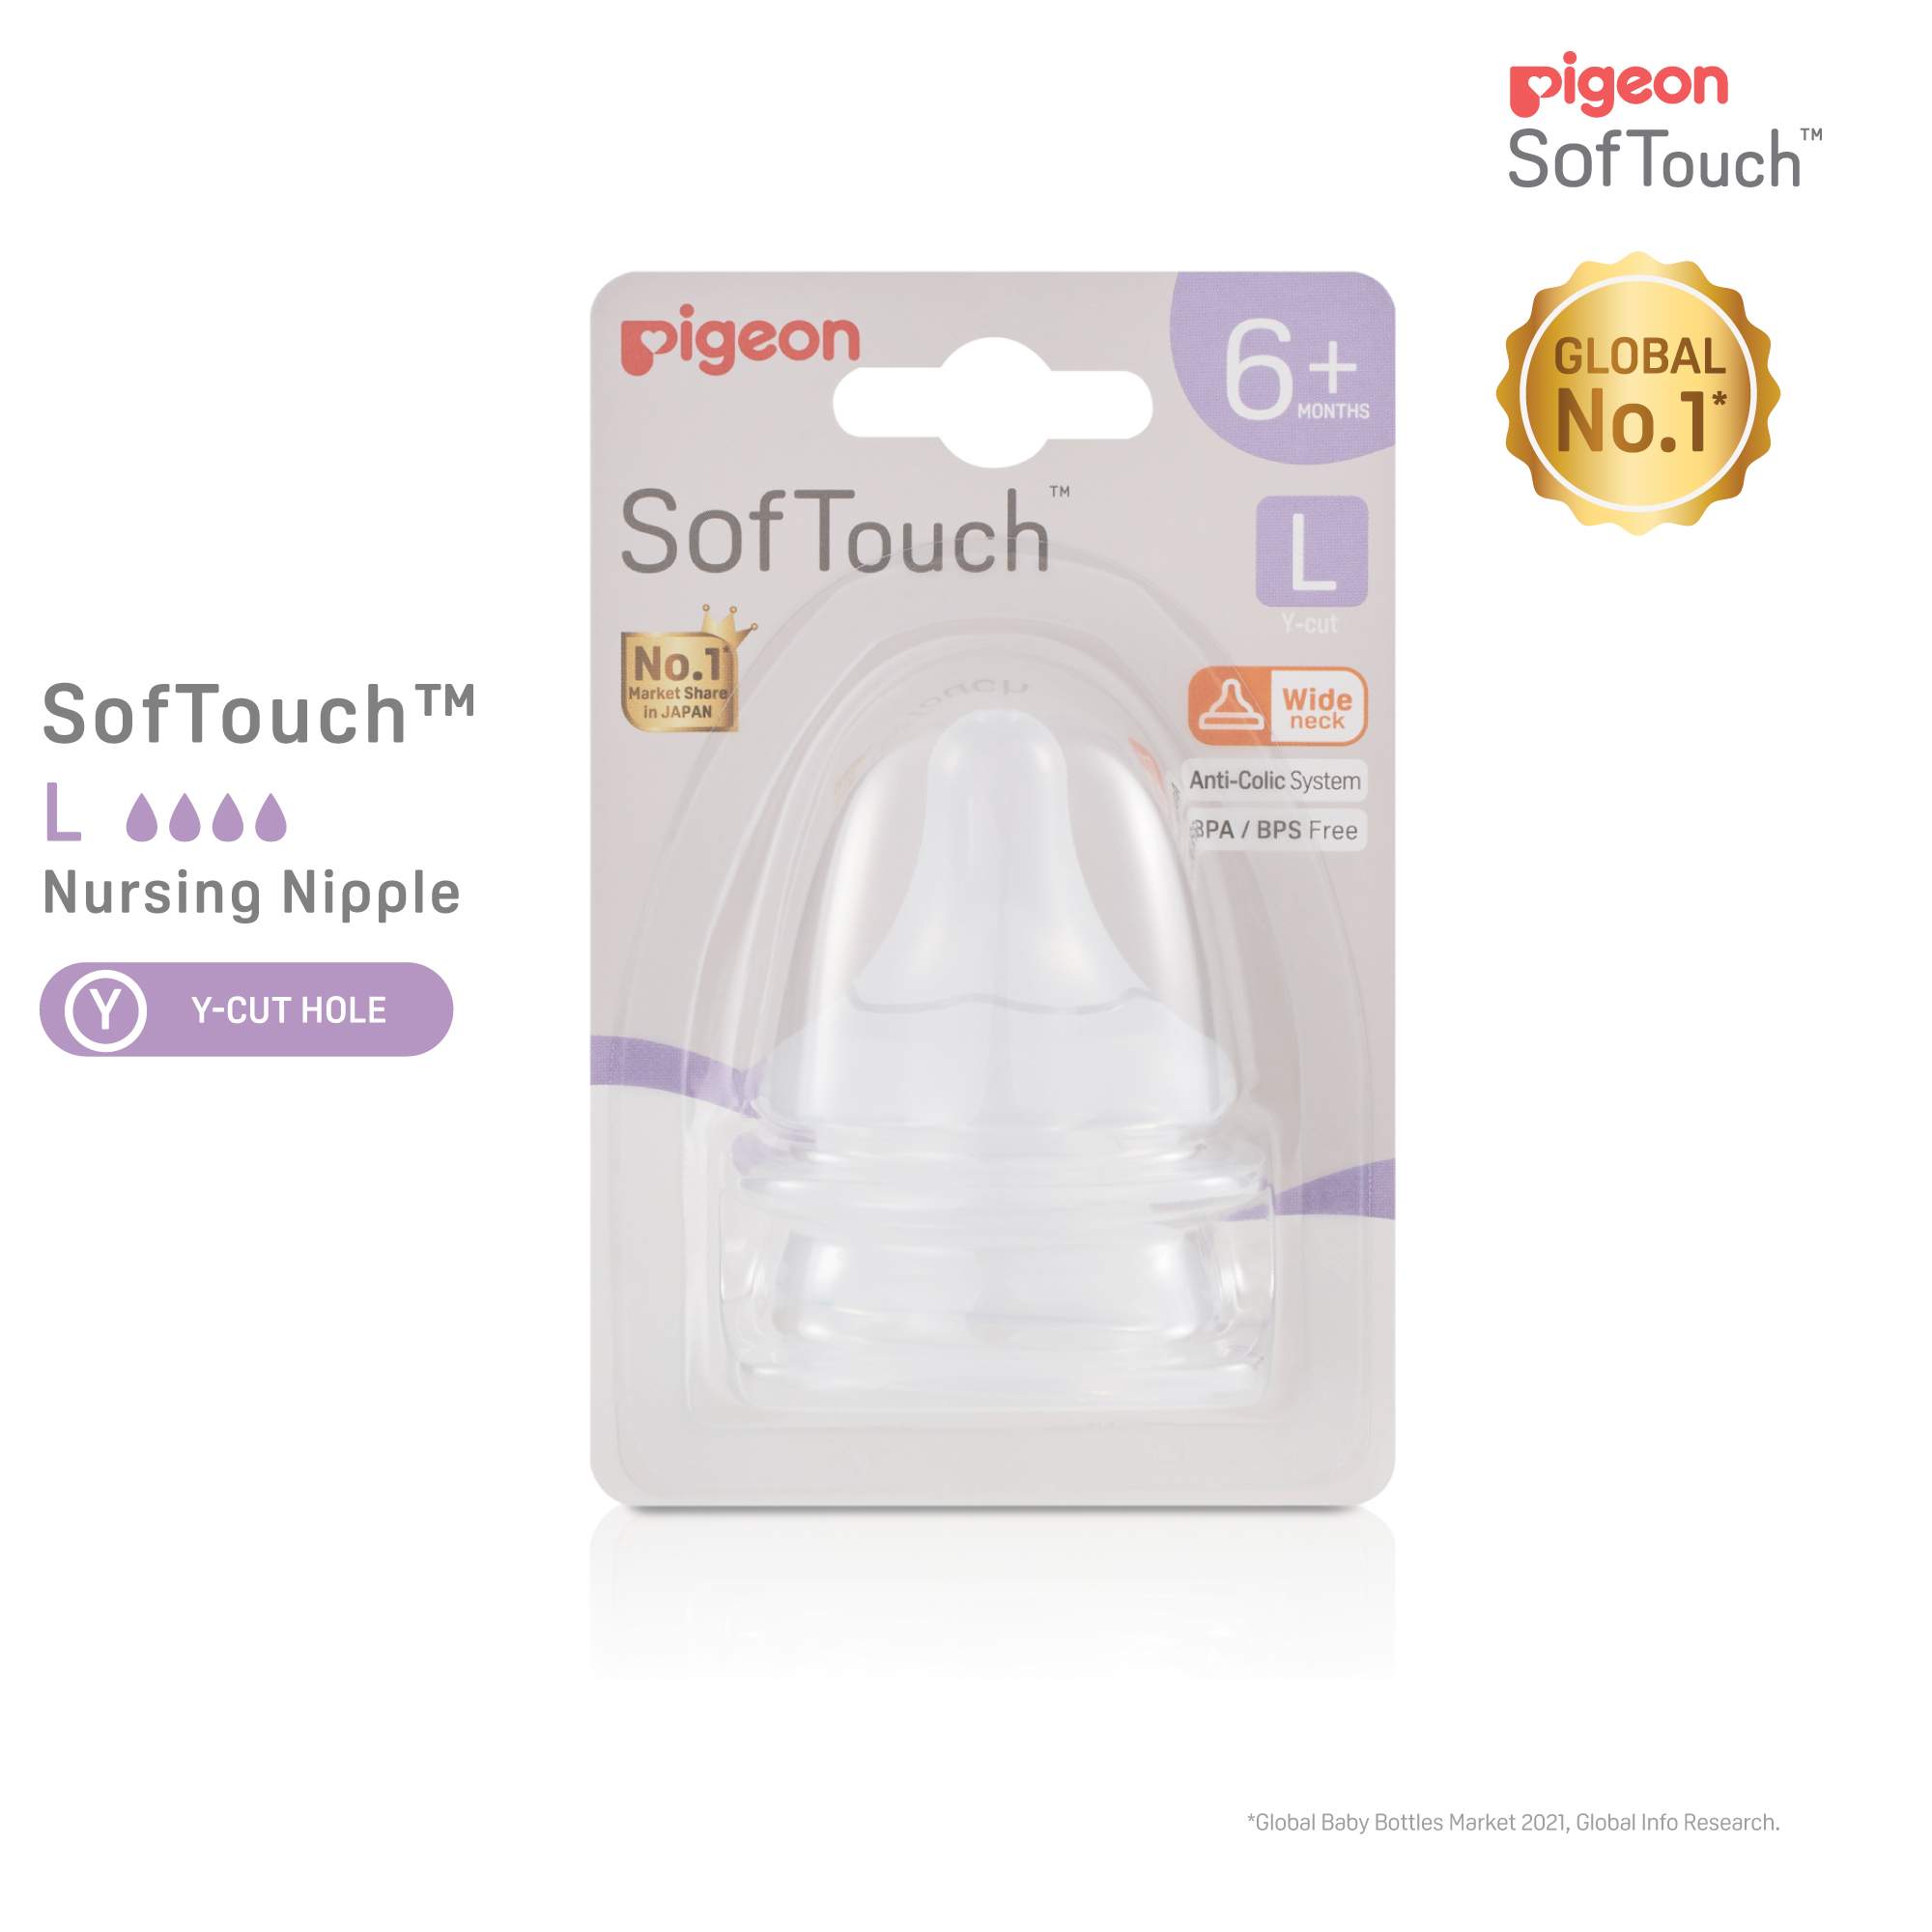 Pigeon SofTouch 3 Nipple Blister Pack 2pcs (L) (PG-79464)